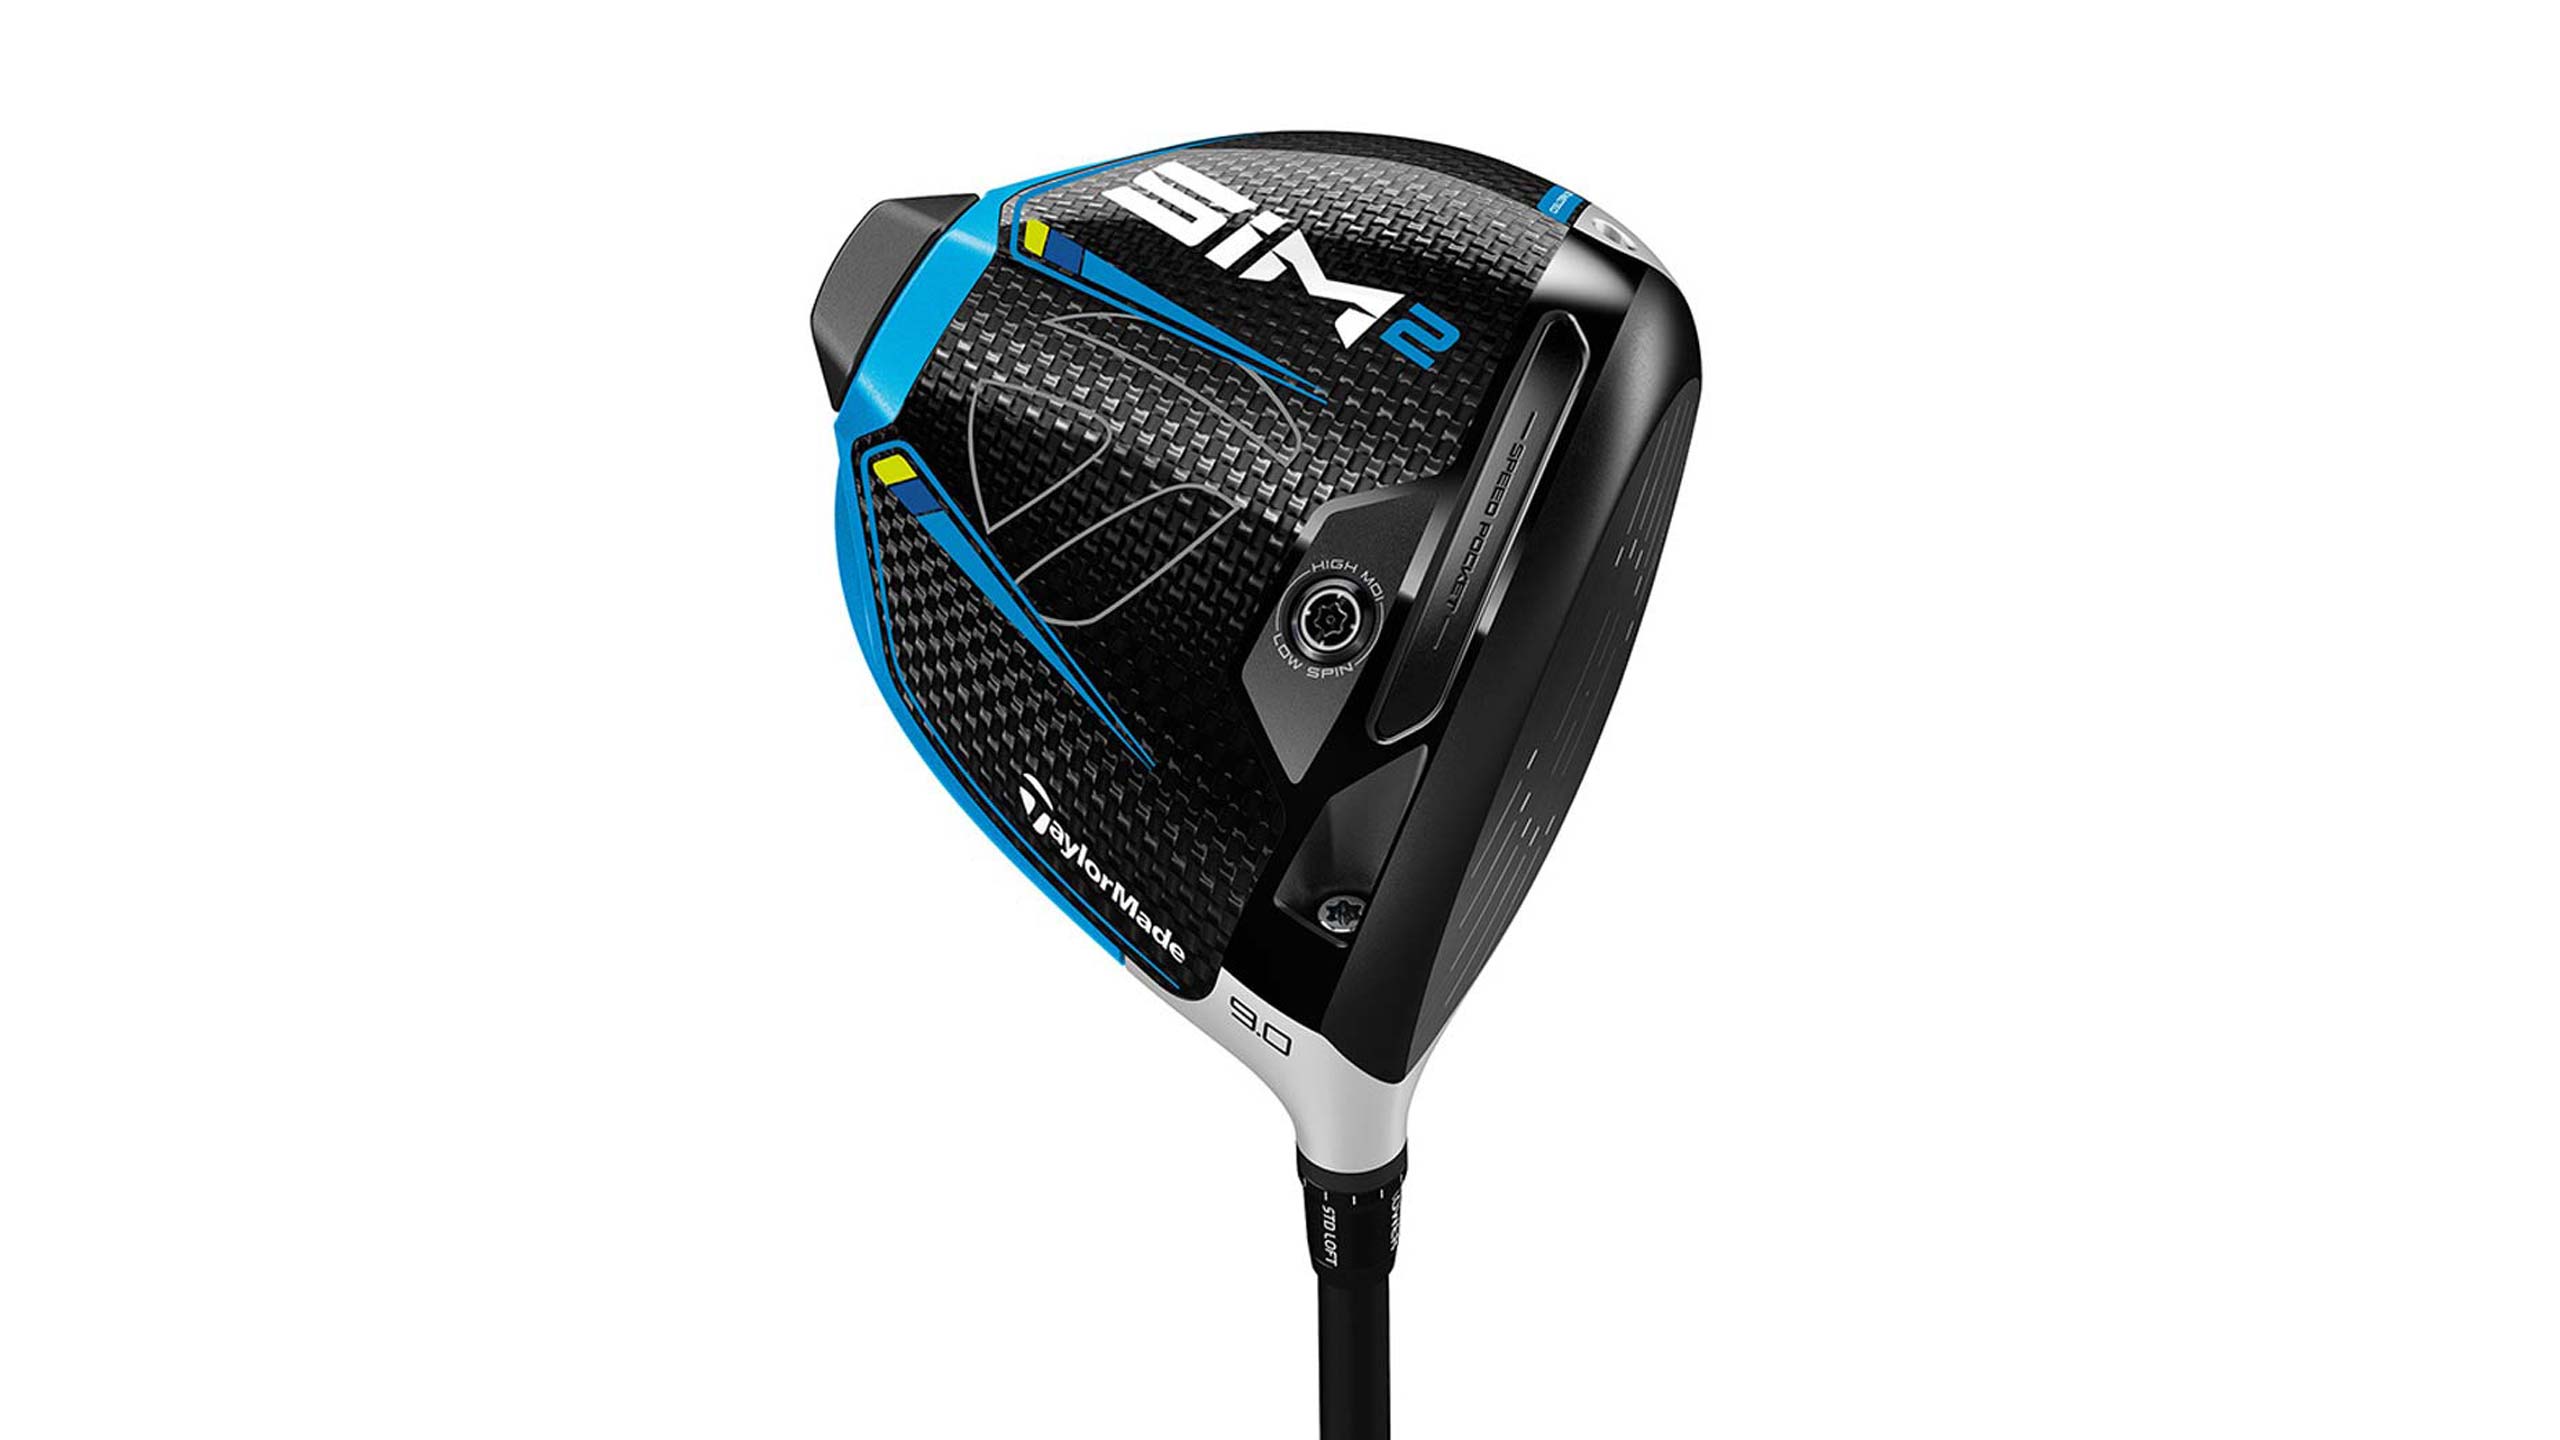 TaylorMade SIM2 driver: ClubTest 2021 review